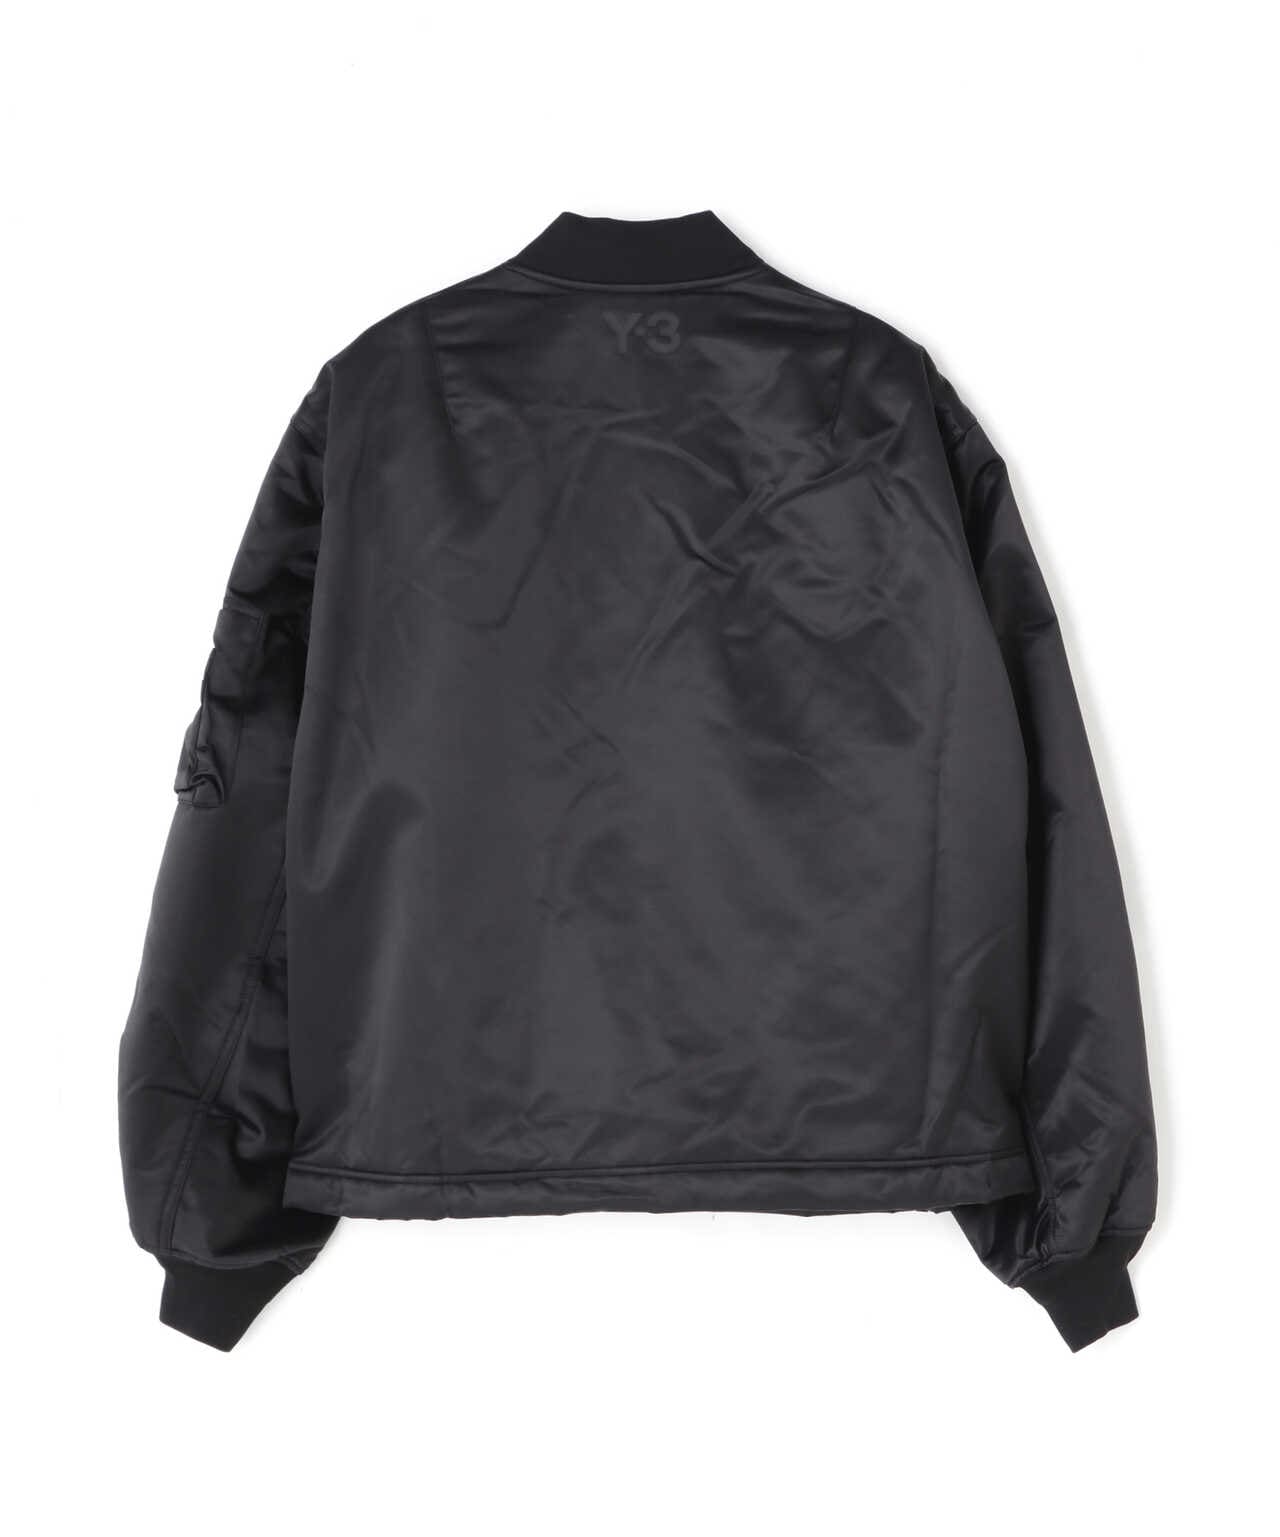 Y-3 M CLASSIC BOMBER / クラシック ボンバー | www.trevires.be